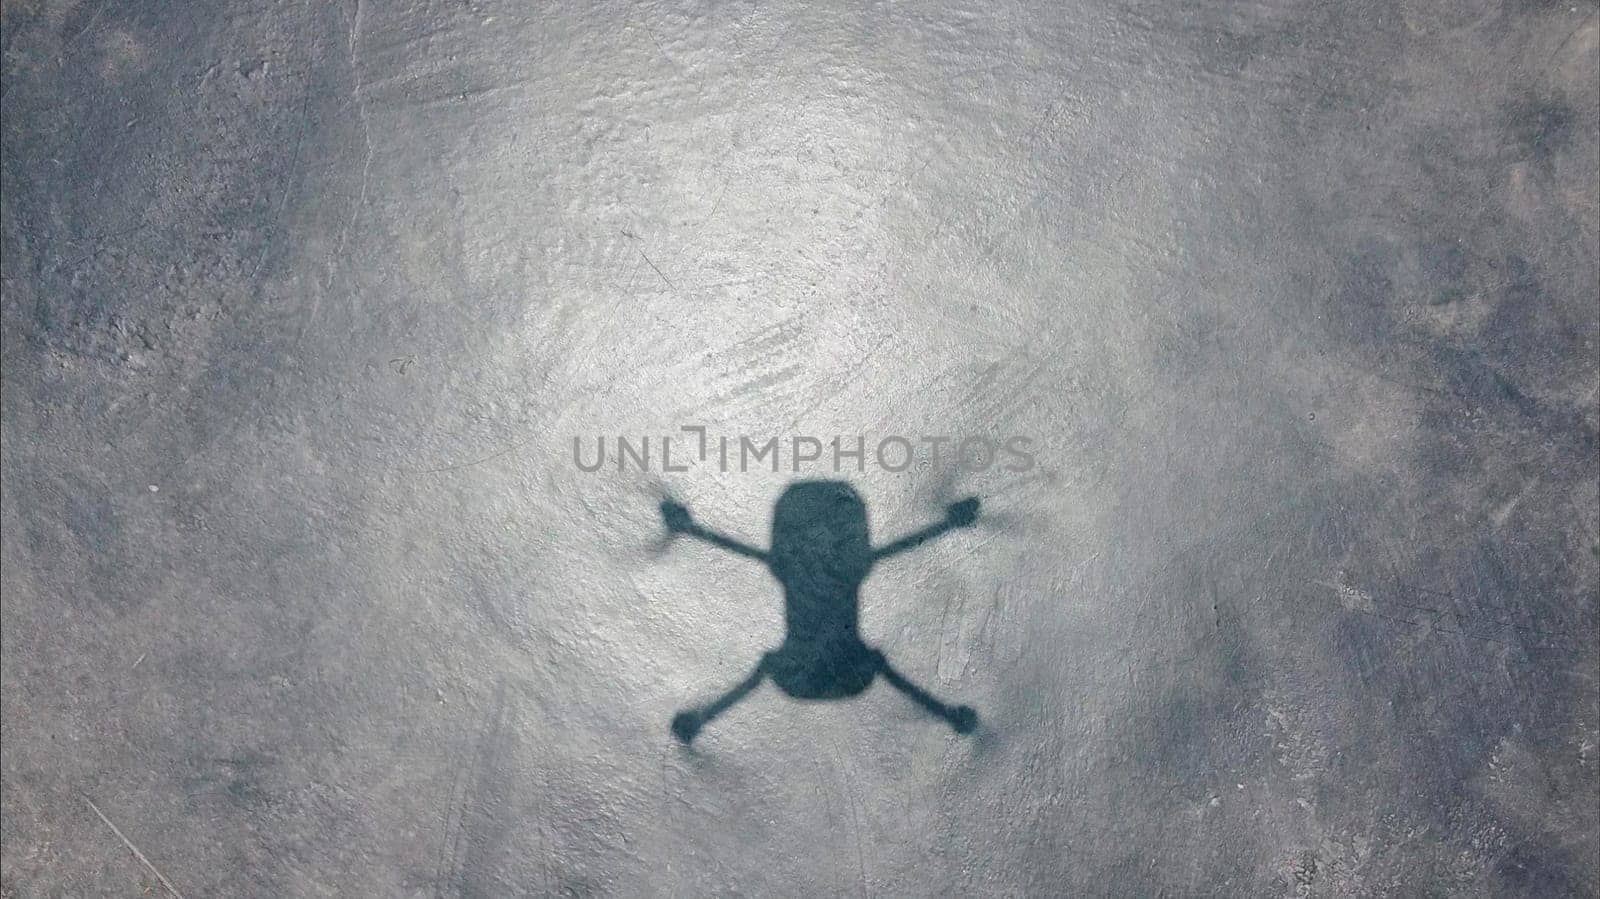 Shadow of a small drone on the pavement. by Peruphotoart